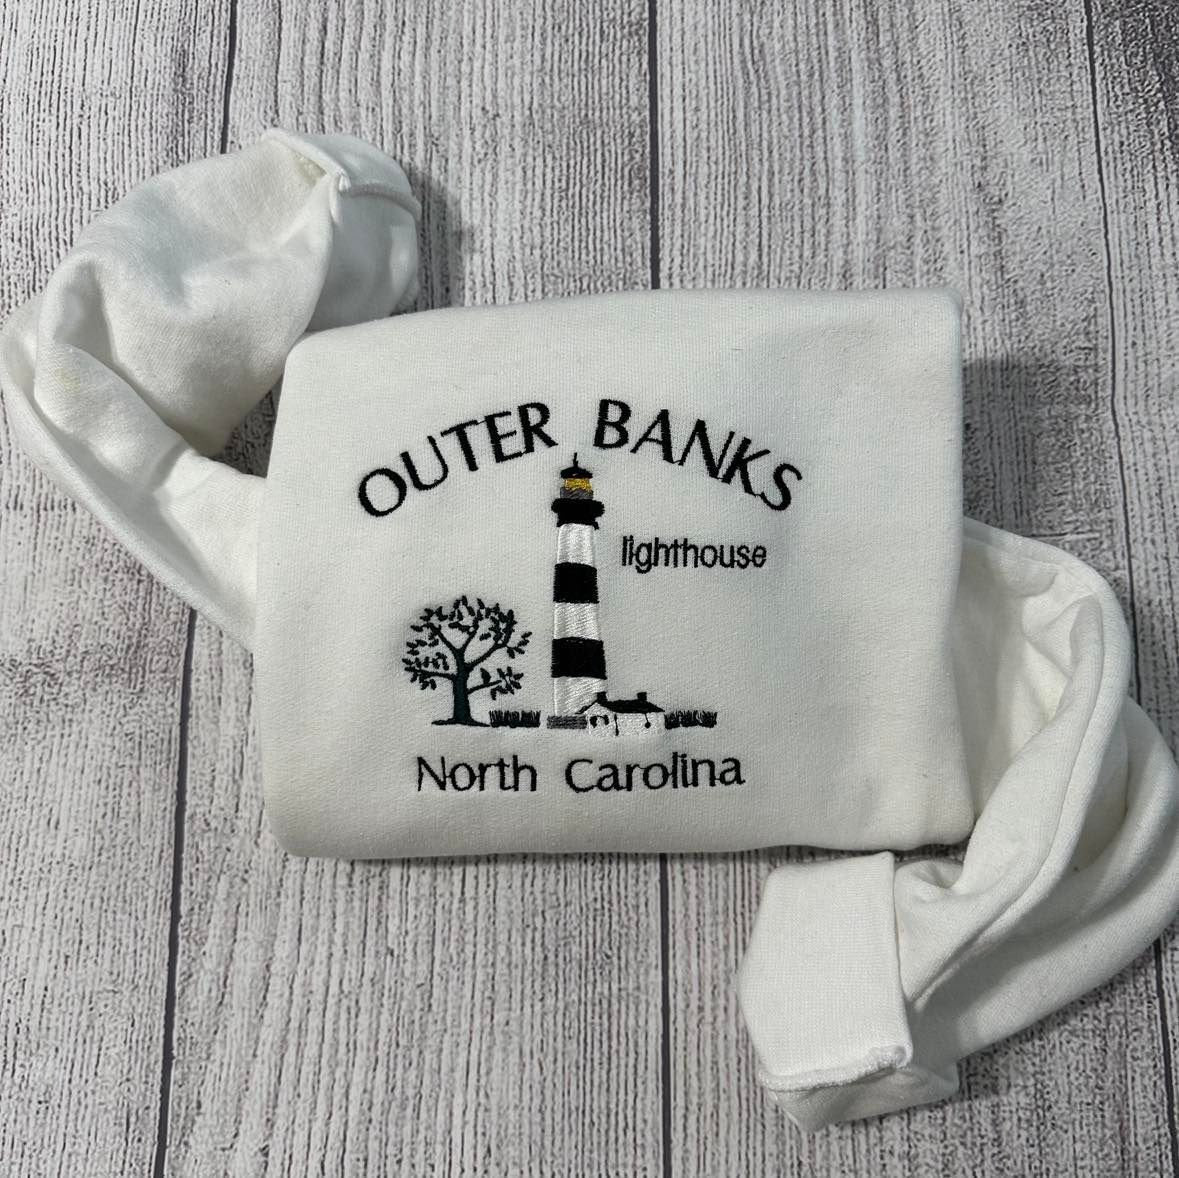 Outer Banks of North Carolina embroidered sweatshirt, North Carolina light house Sweatshirts, Outer banks light house crewneck - MrEmbroideryGifts